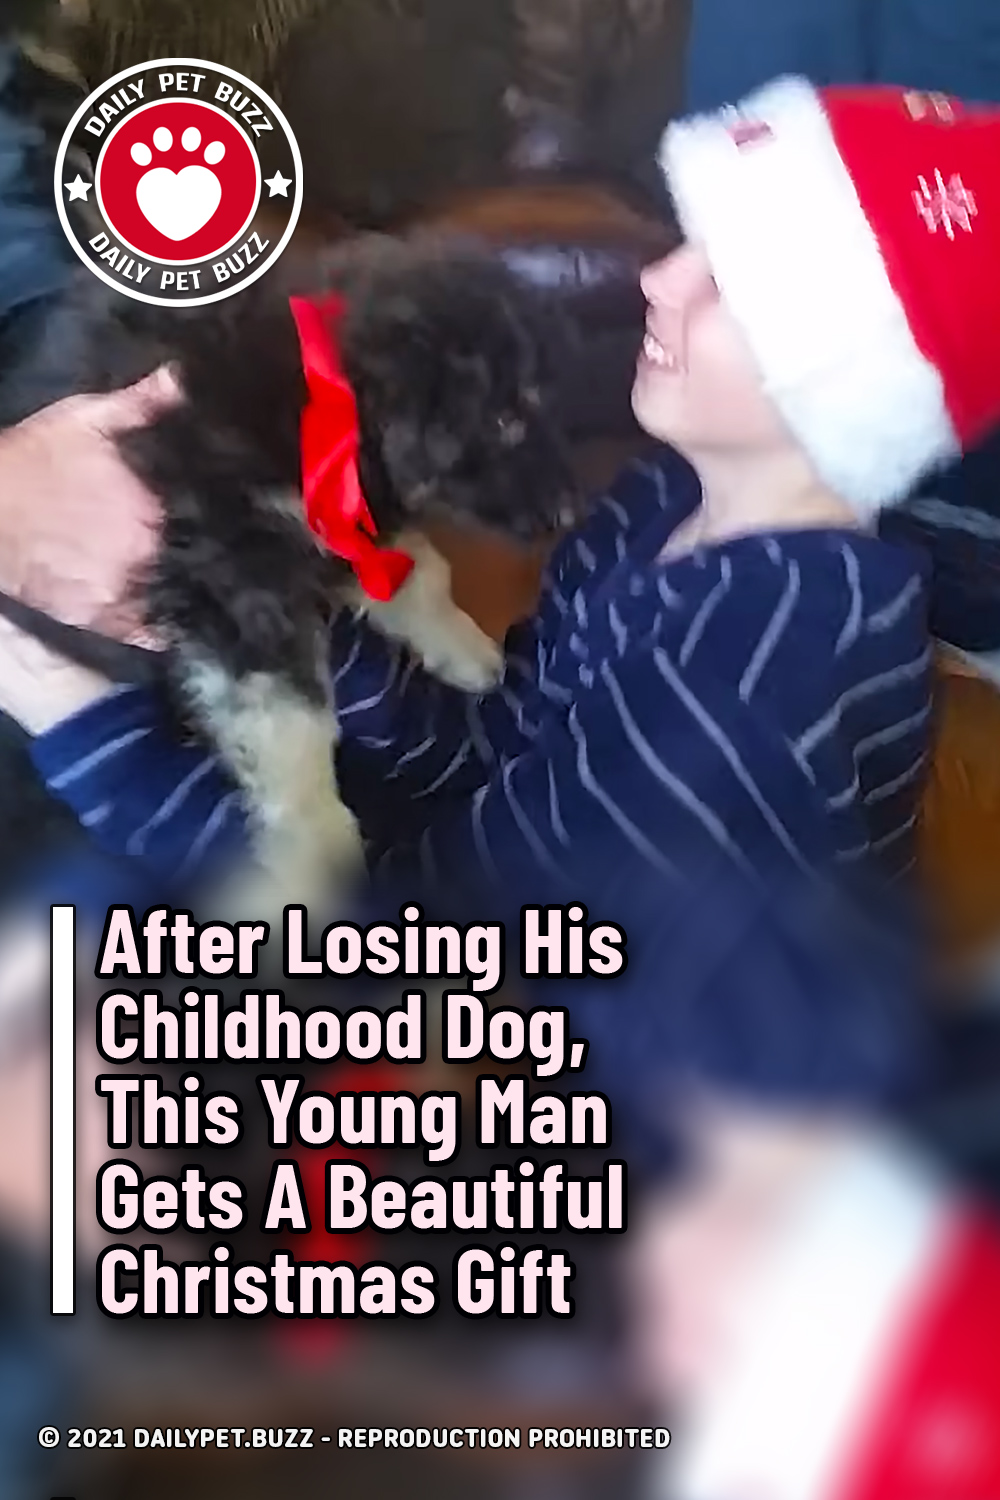 After Losing His Childhood Dog, This Young Man Gets A Beautiful Christmas Gift